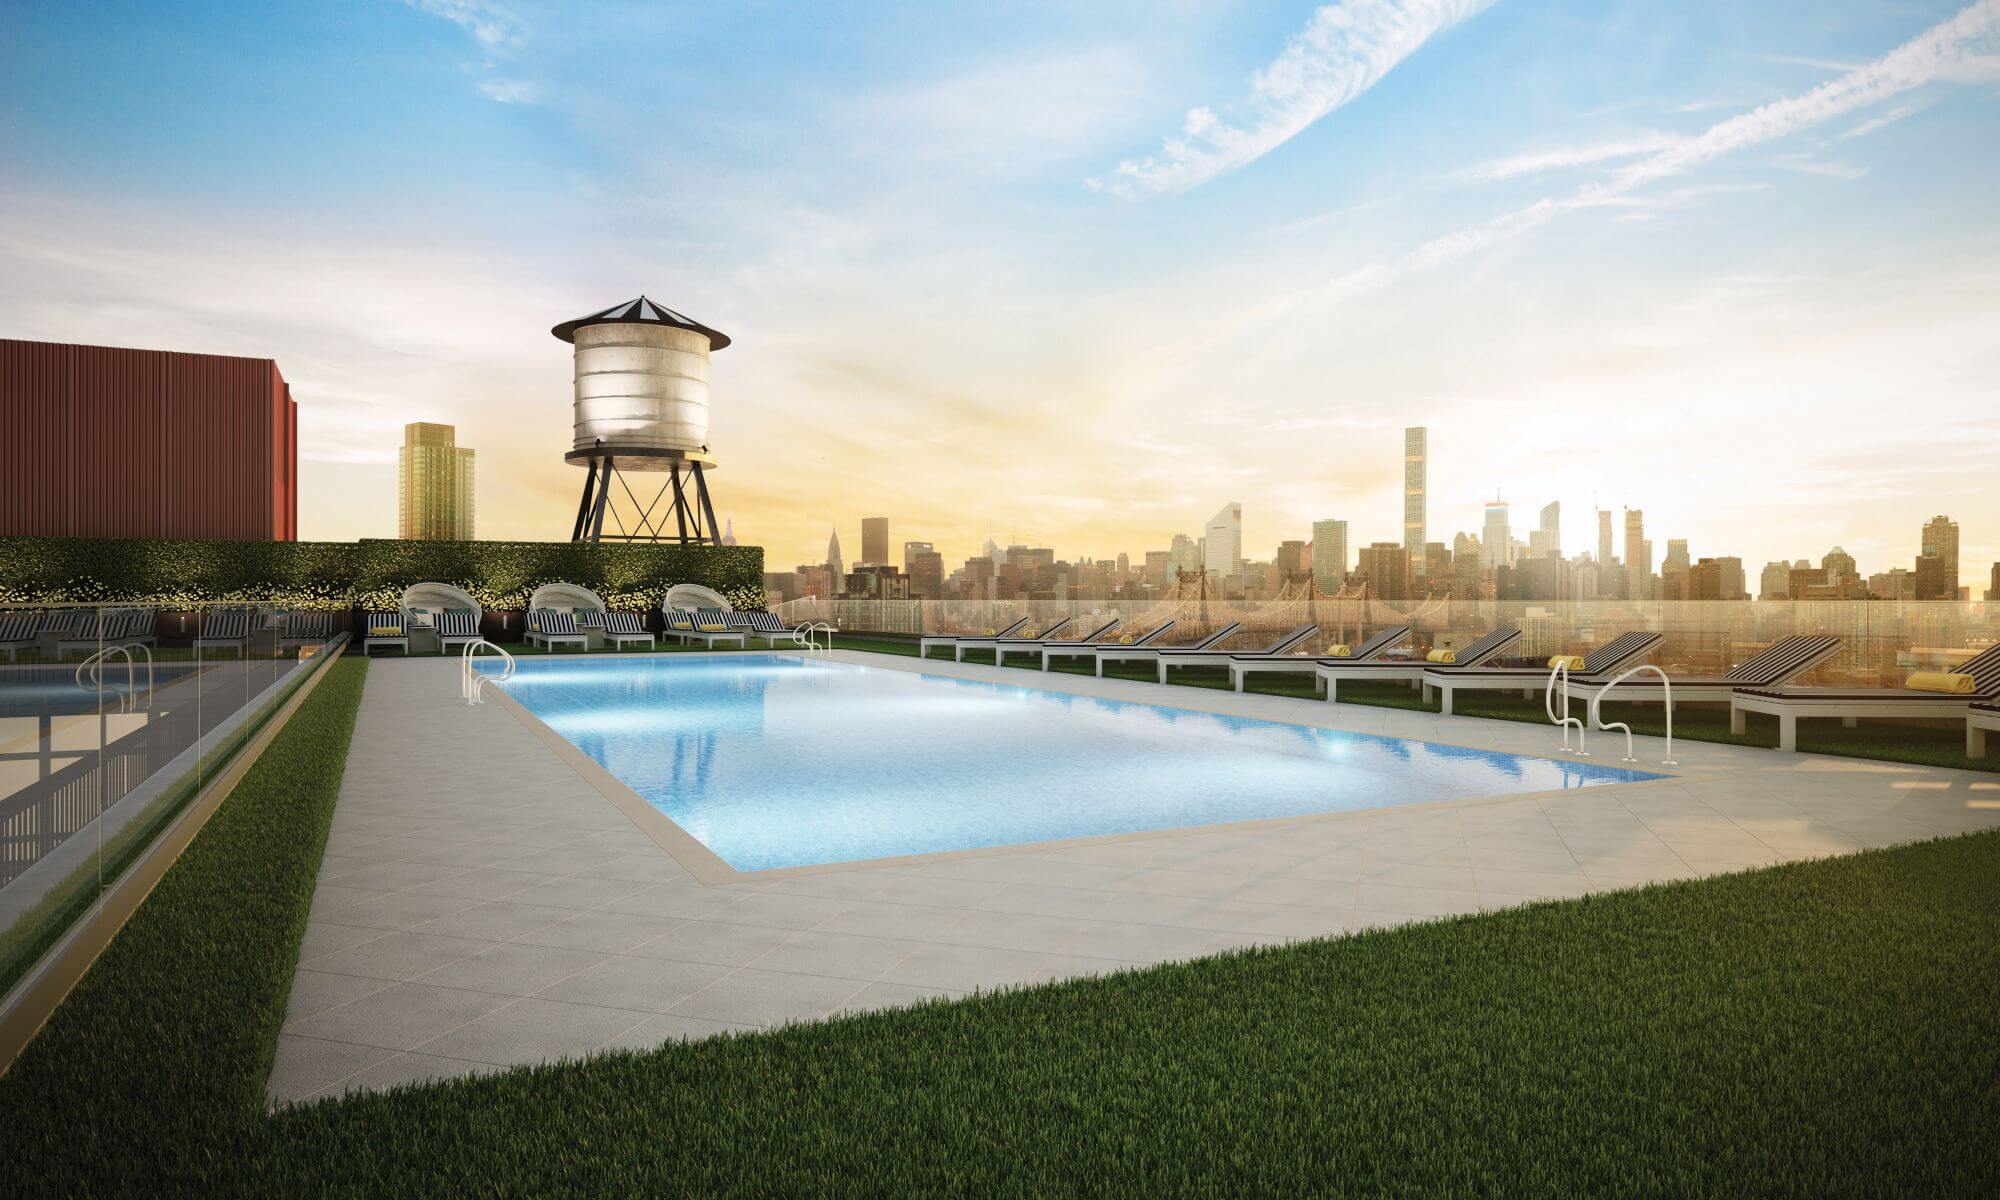 Residential Buildings With Rooftop Pools - ARC 3002 39th Avenue - Lightstone Group